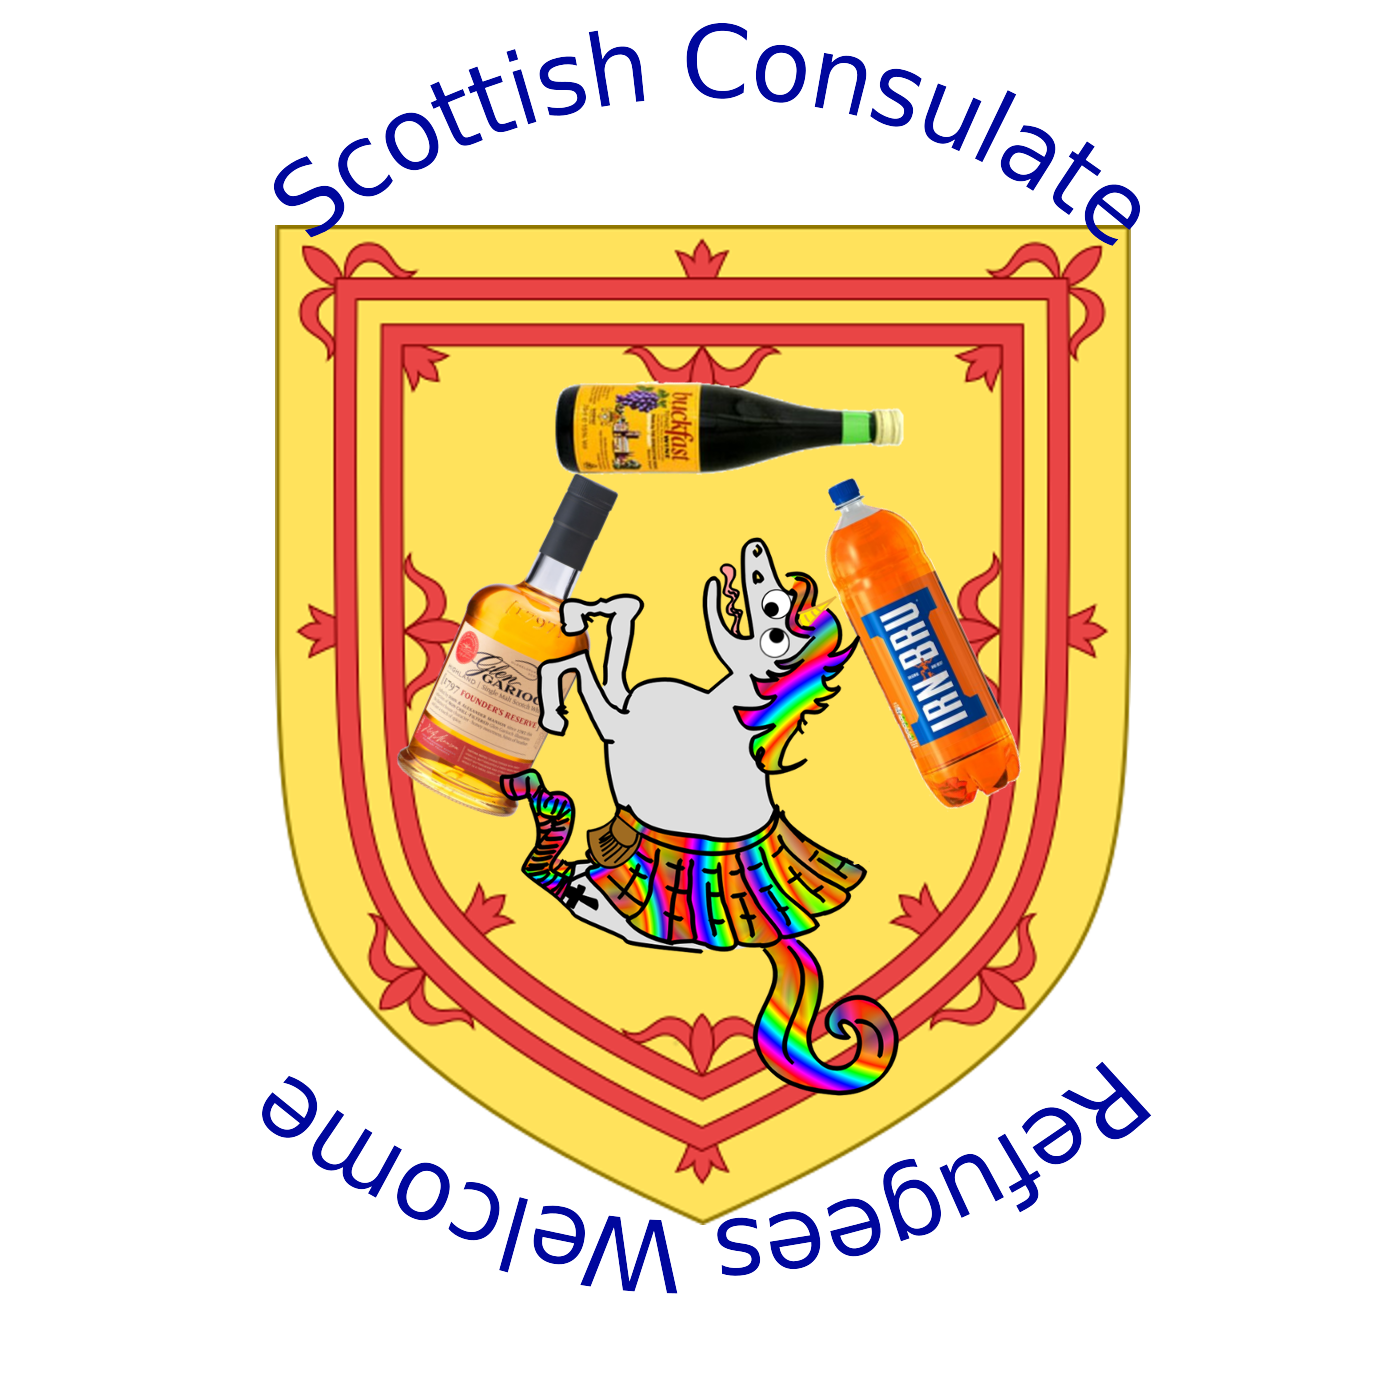 scotcon_coat_of_arms.png